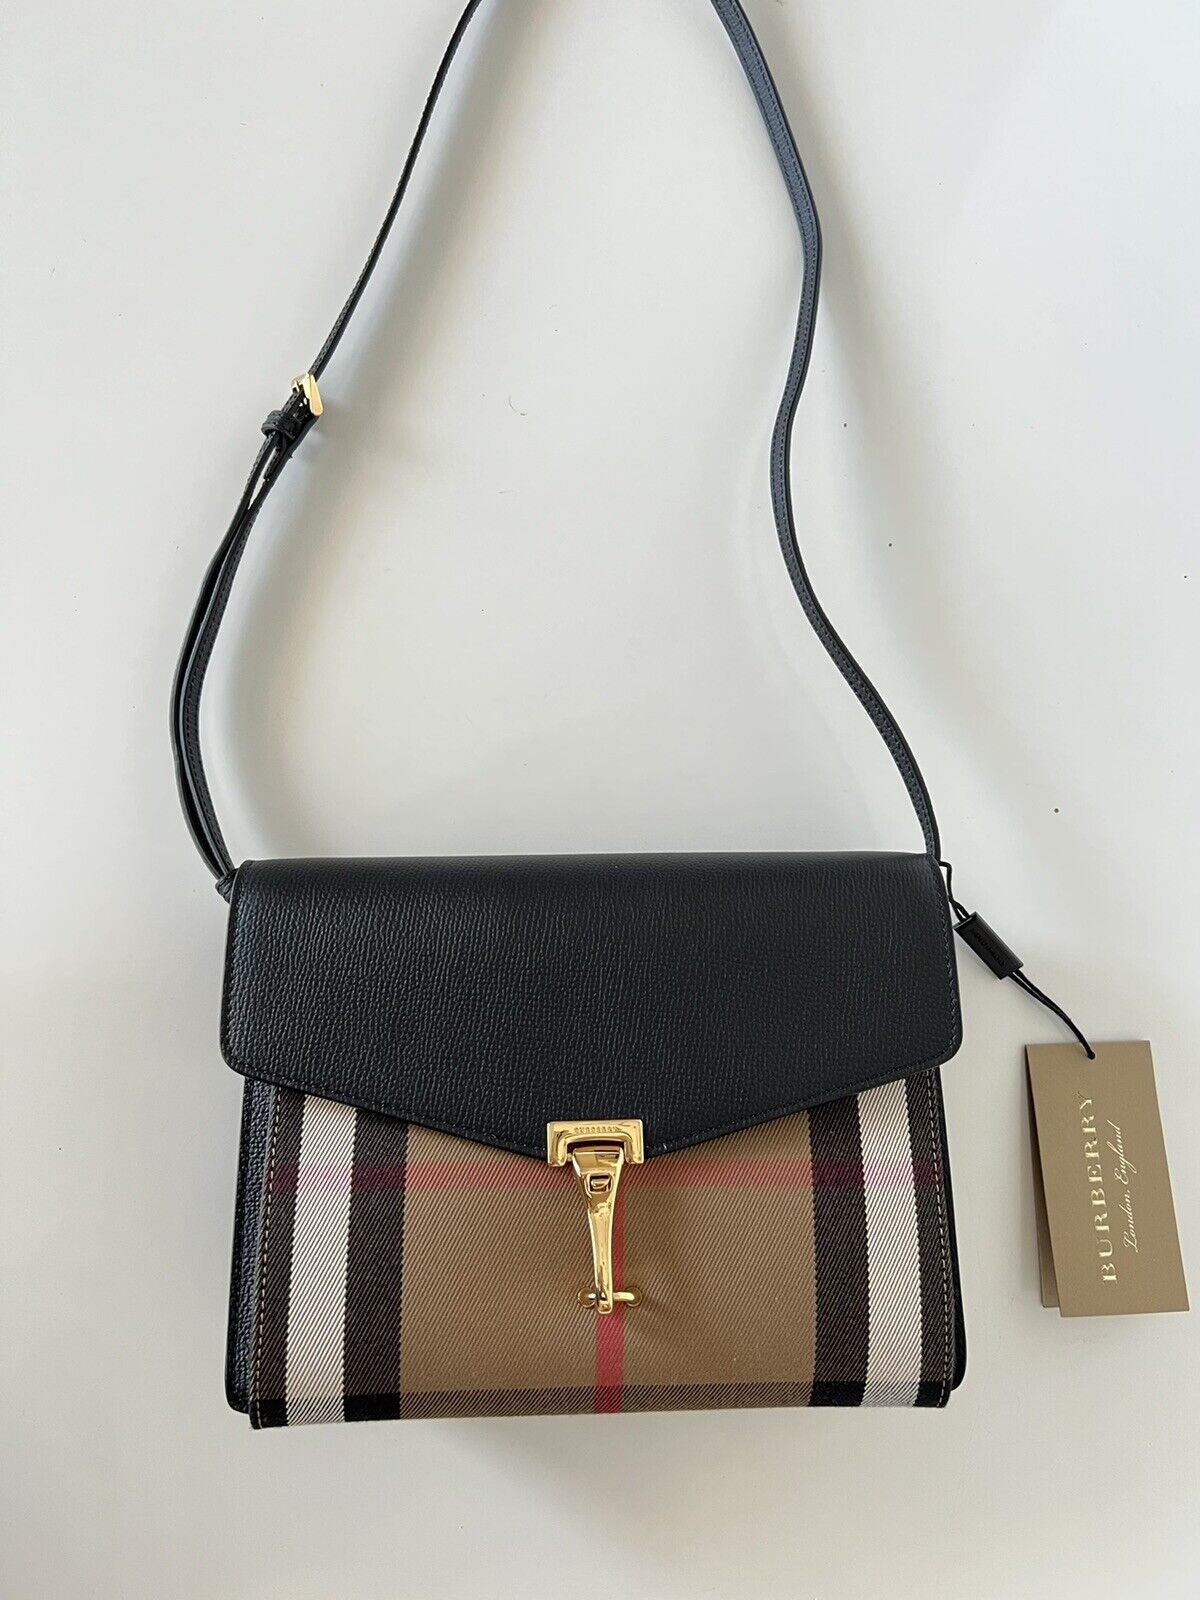 NWT Burberry Small Macken House Check Derby Leather Cross Body Bag Black 3980825